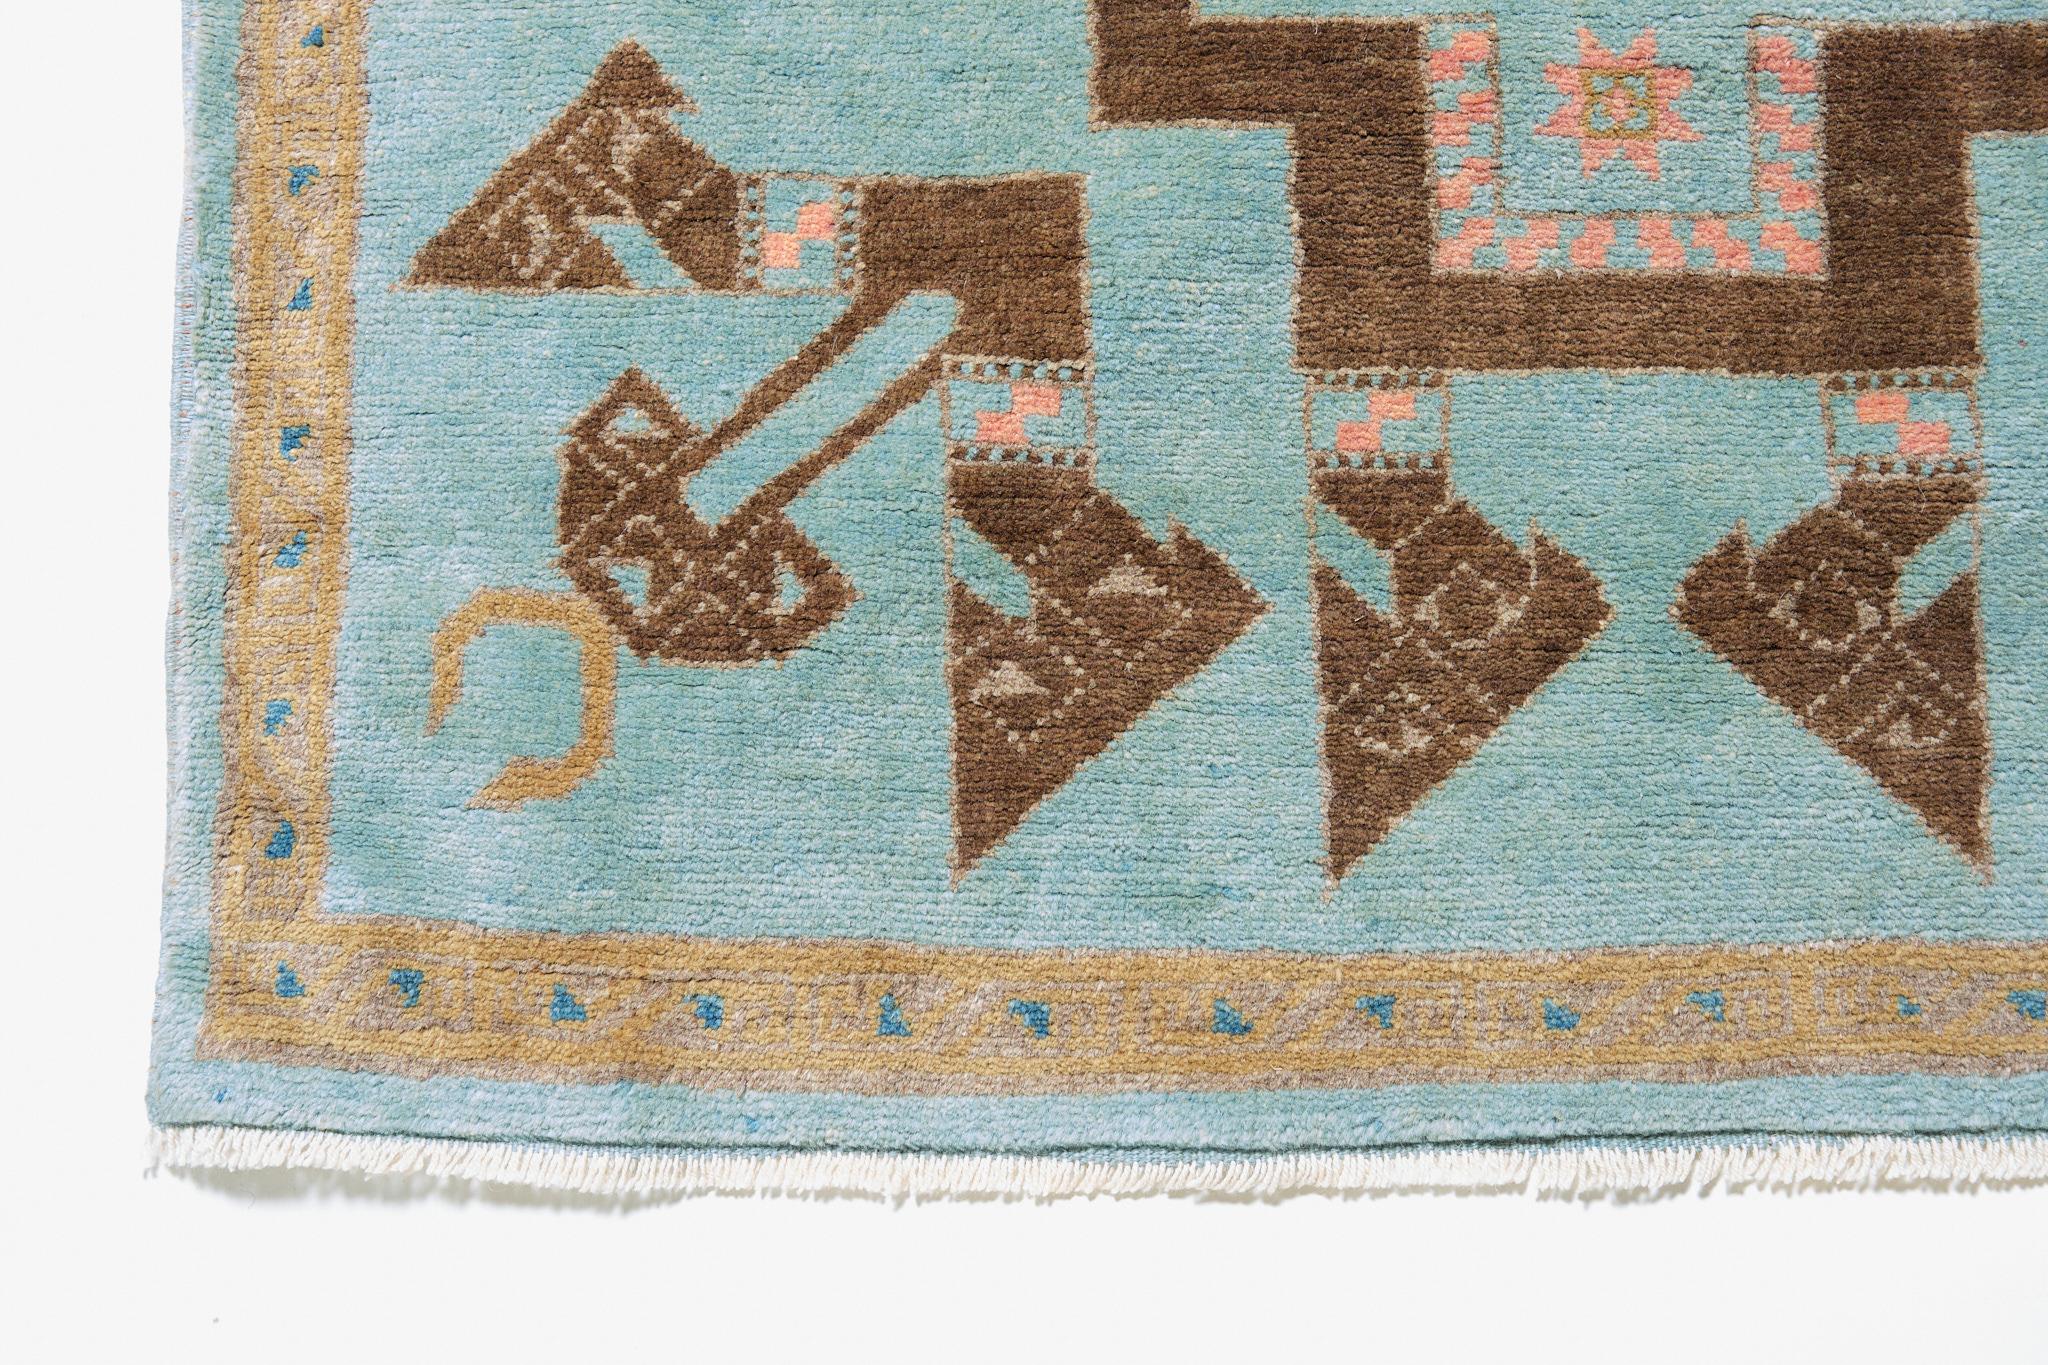 The source of the carpet comes from the book Orient Stars Collection, Anatolian Tribal Rugs 1050-1750, Michael Franses, Hali Publications Ltd, 2021 fig.24. This 13th-century carpet is from probably the Konya region, central Anatolia, circa 1200-1300